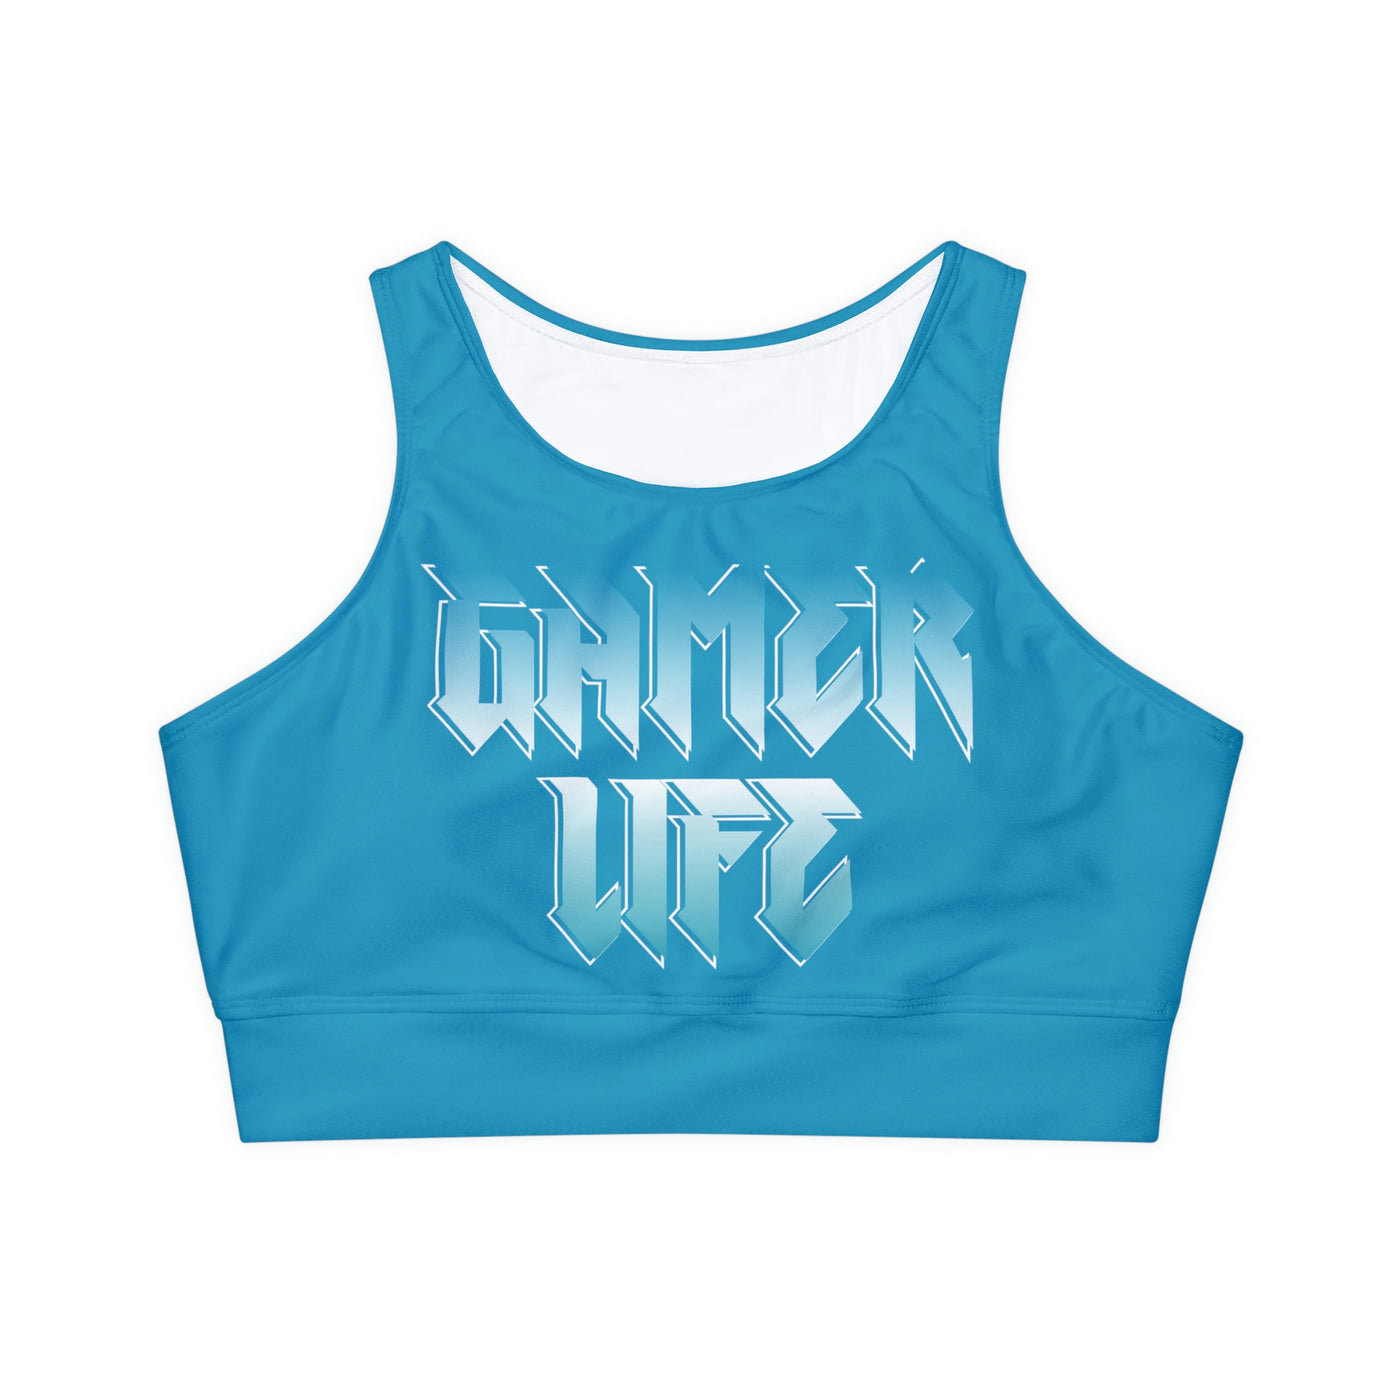 Gamer Fresh Limited Edition | Qahwah Pop | Fully Lined Padded Ladies Turquoise Sports Bra